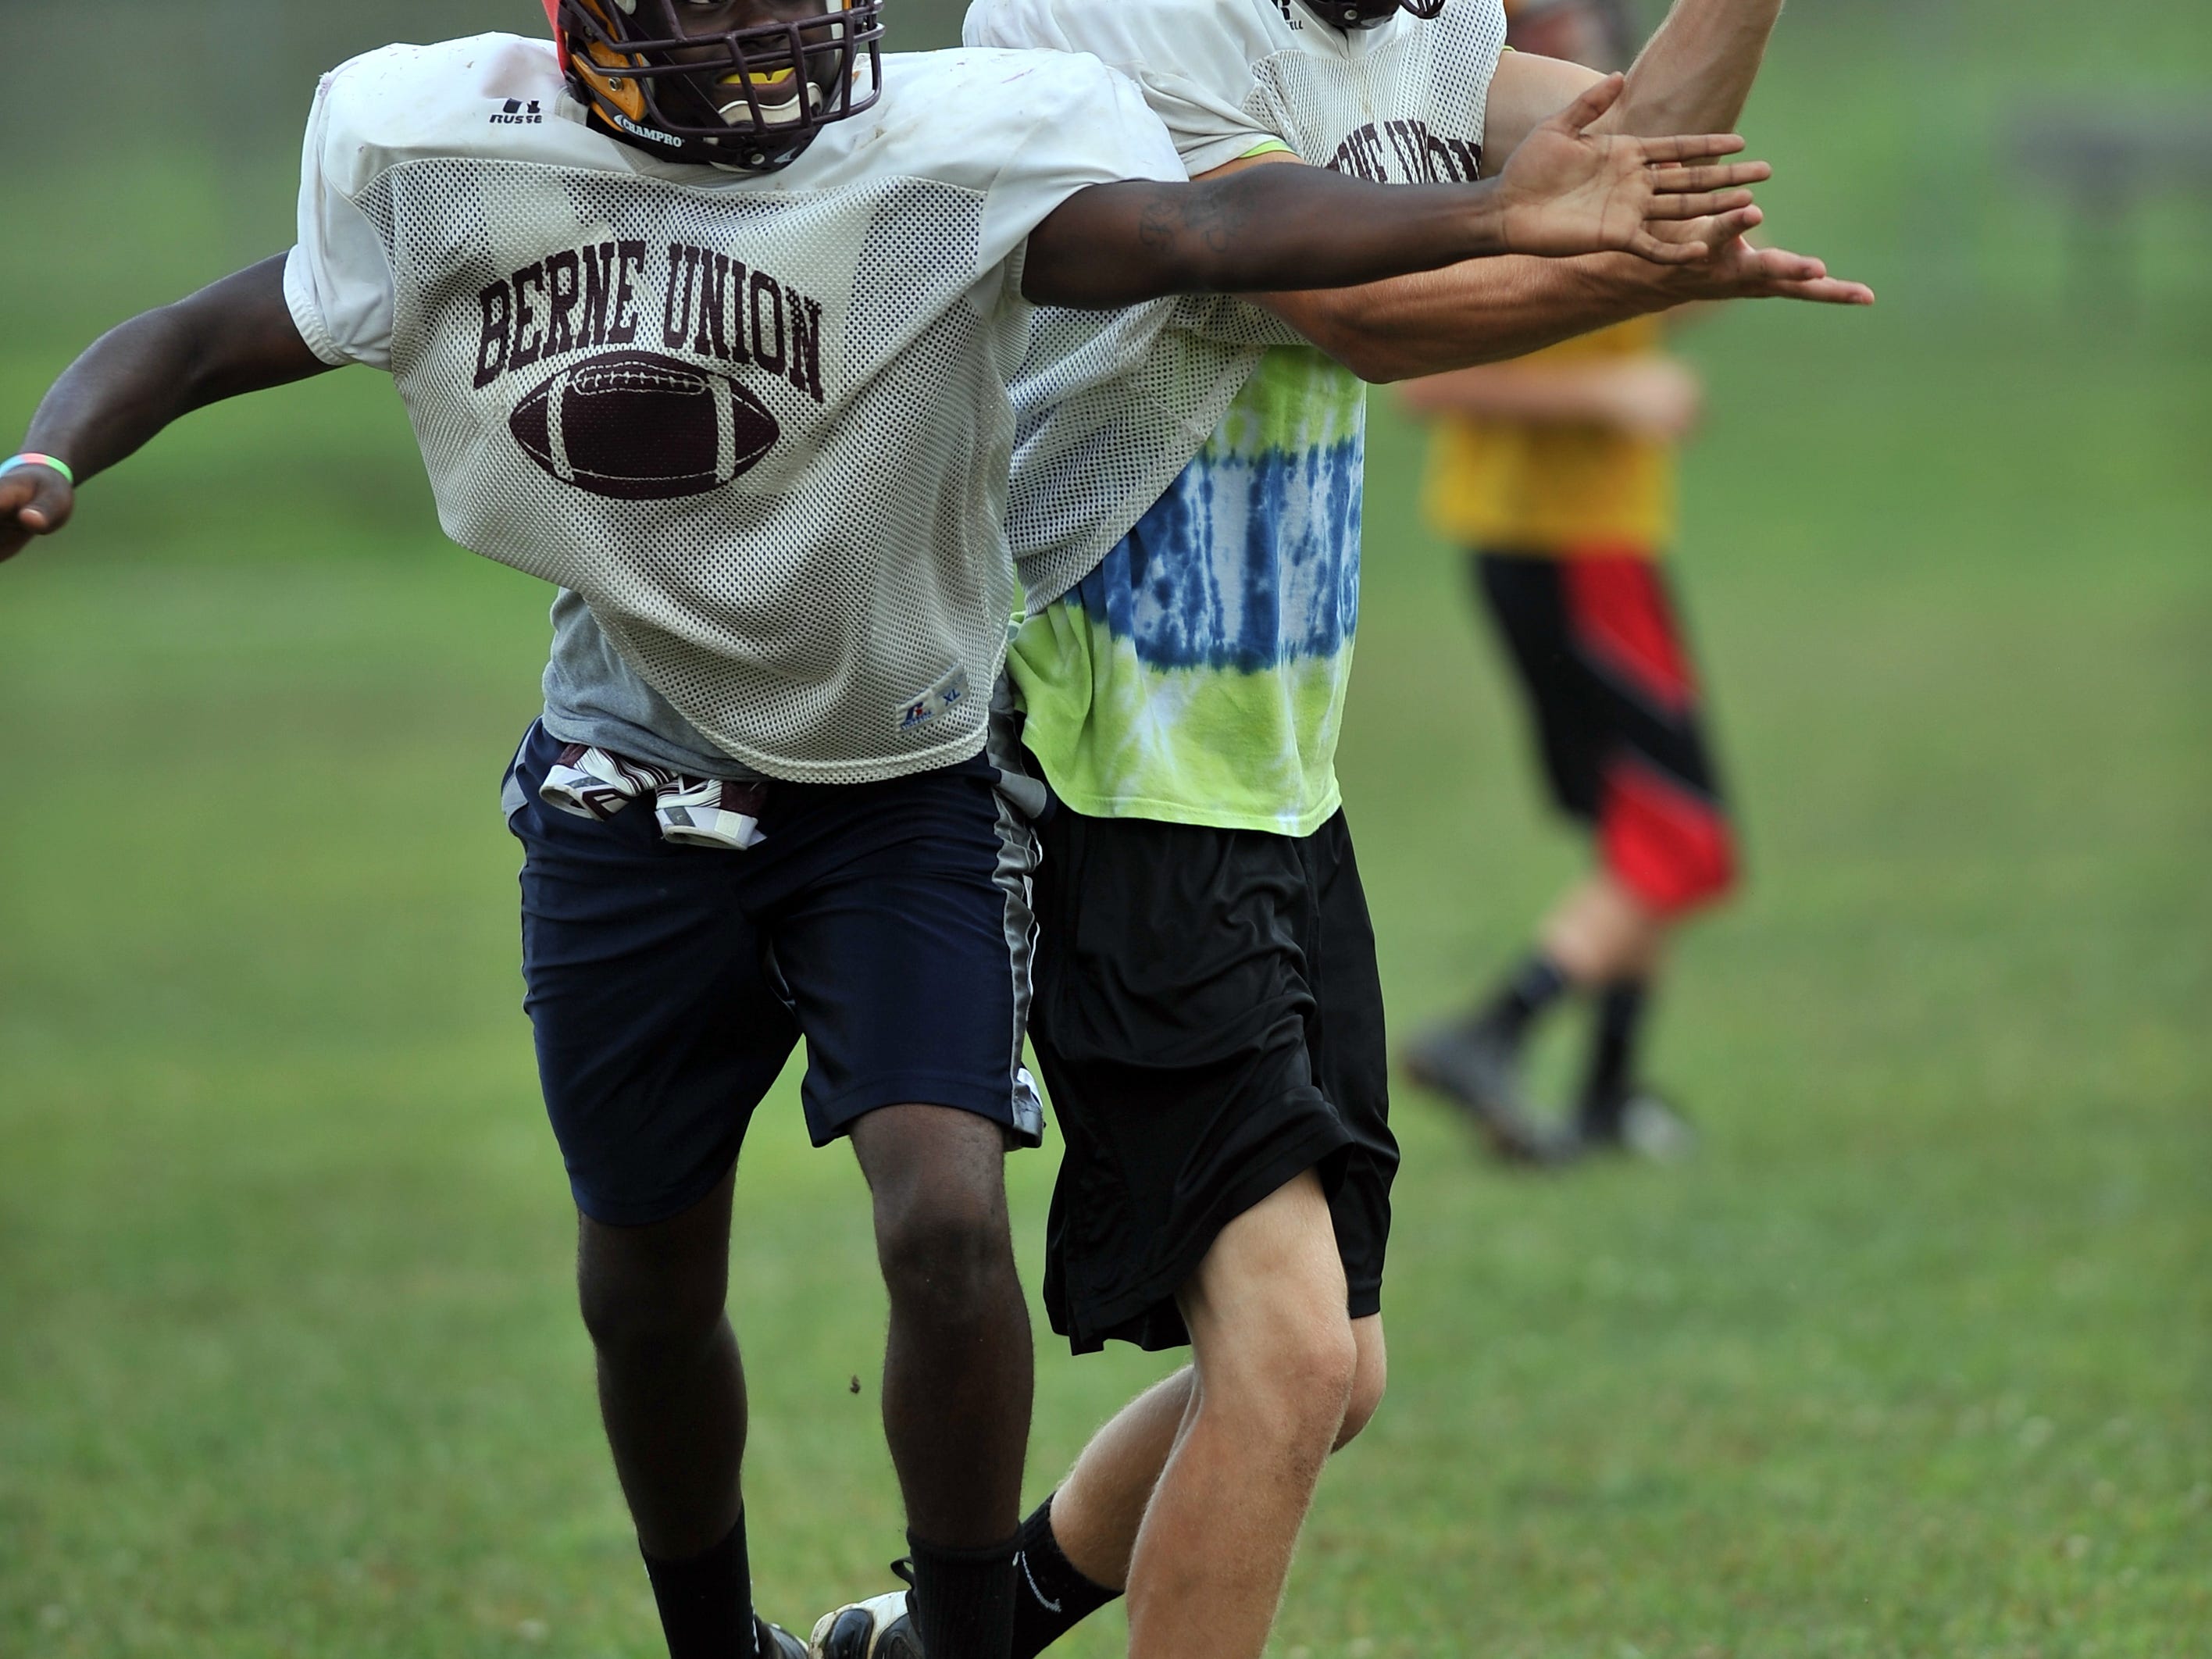  Zackh Maust picks off a pass during a Berne Union High School football practice Aug. 12 in Sugar Grove. 